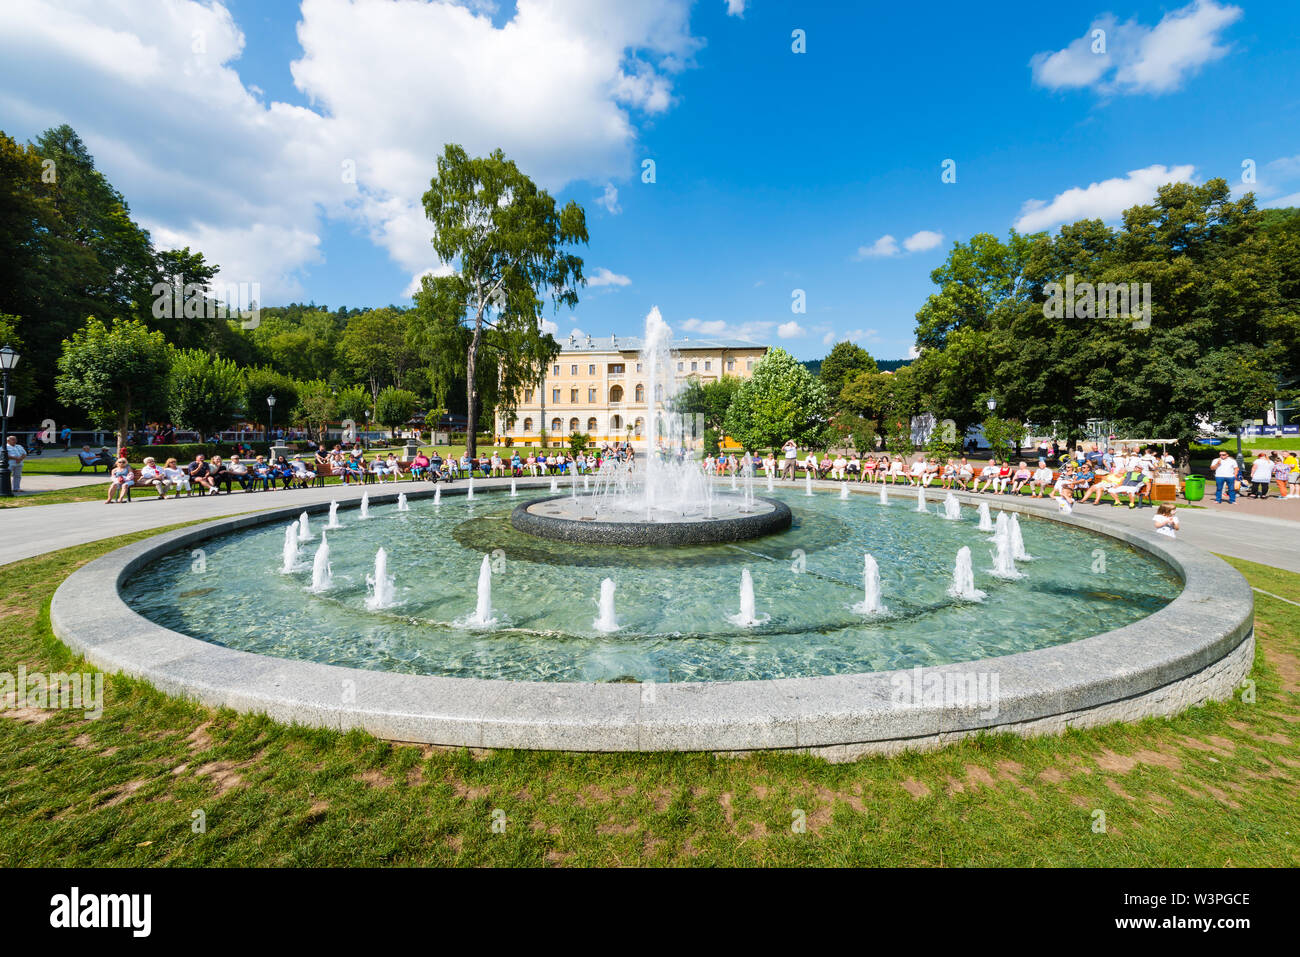 KRYNICA ZDROJ, POLAND - August 23, 2015: Multimedia fountain located in the center of the Krynica Promenade, next to the Old Spa House Stock Photo